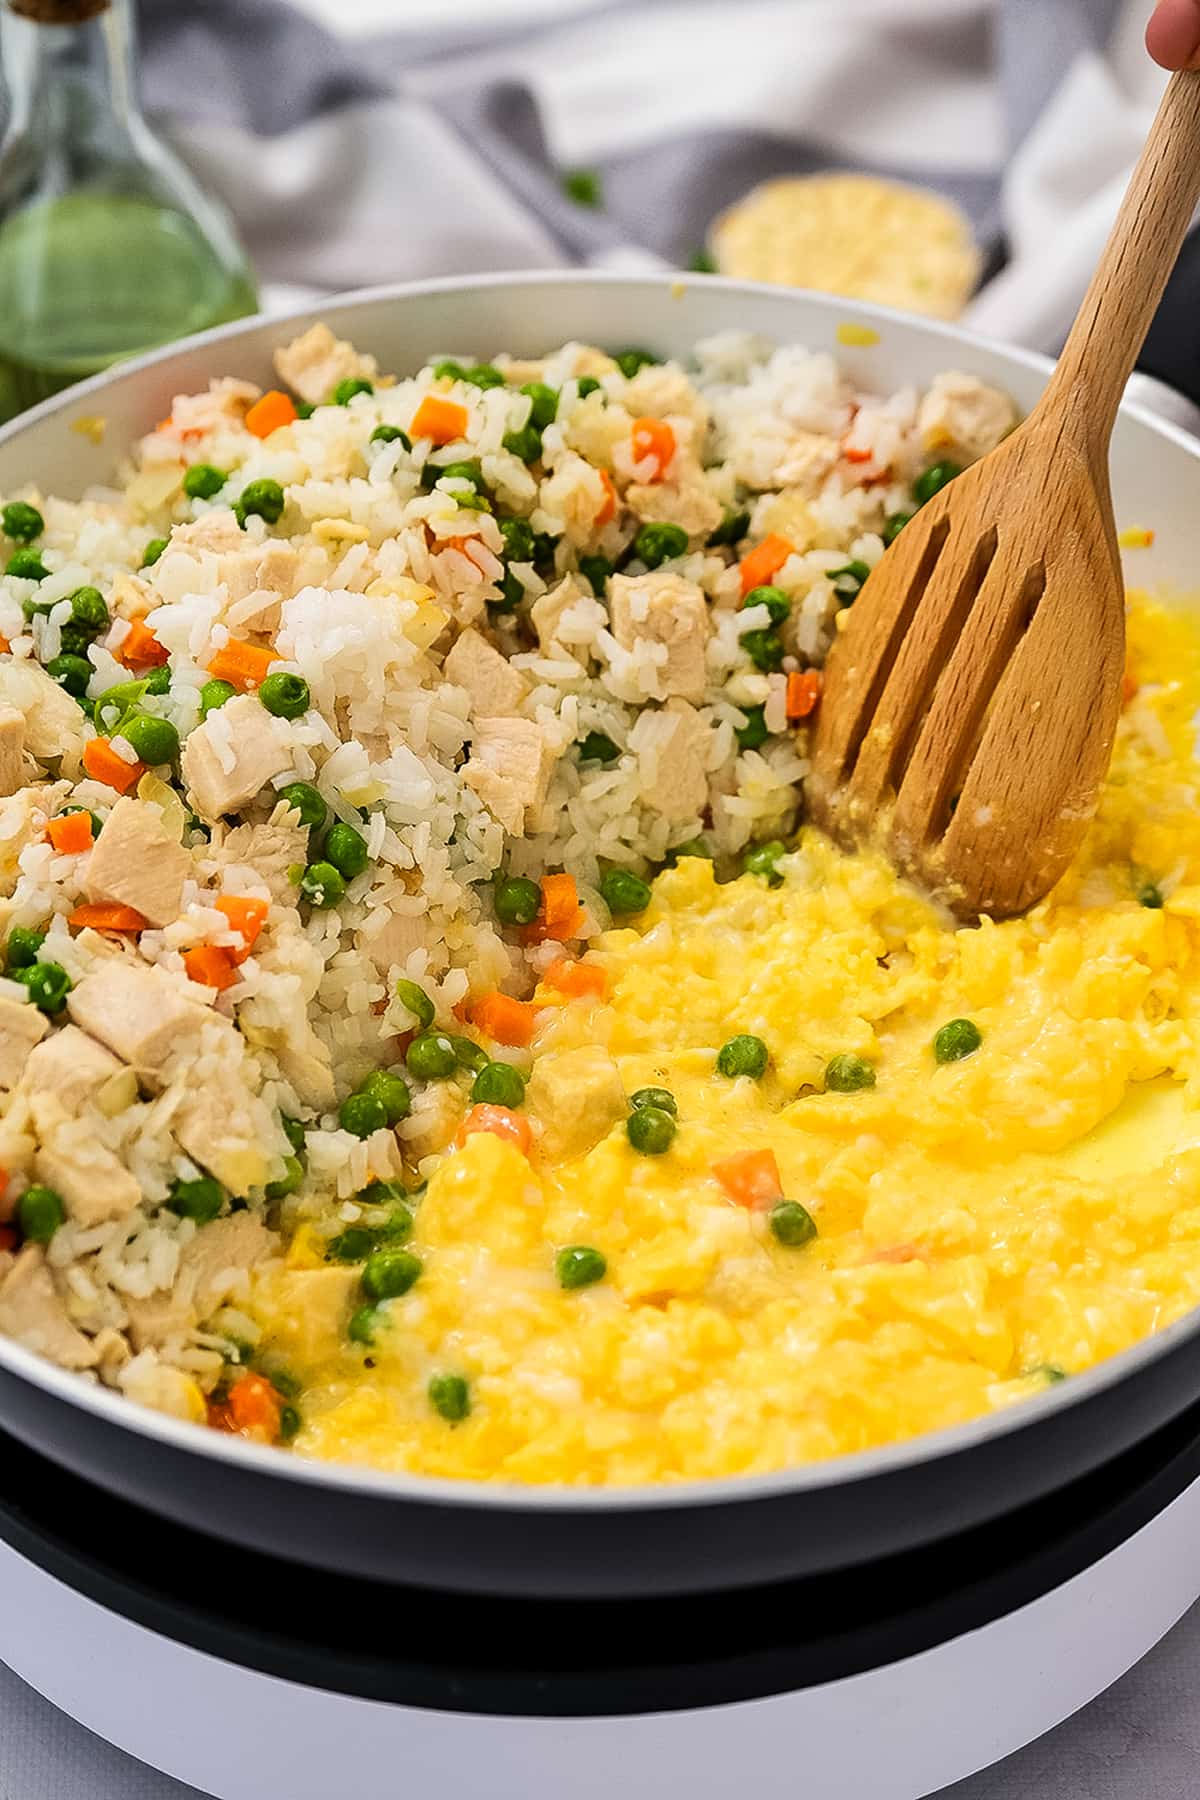 Pan with fried rice and eggs